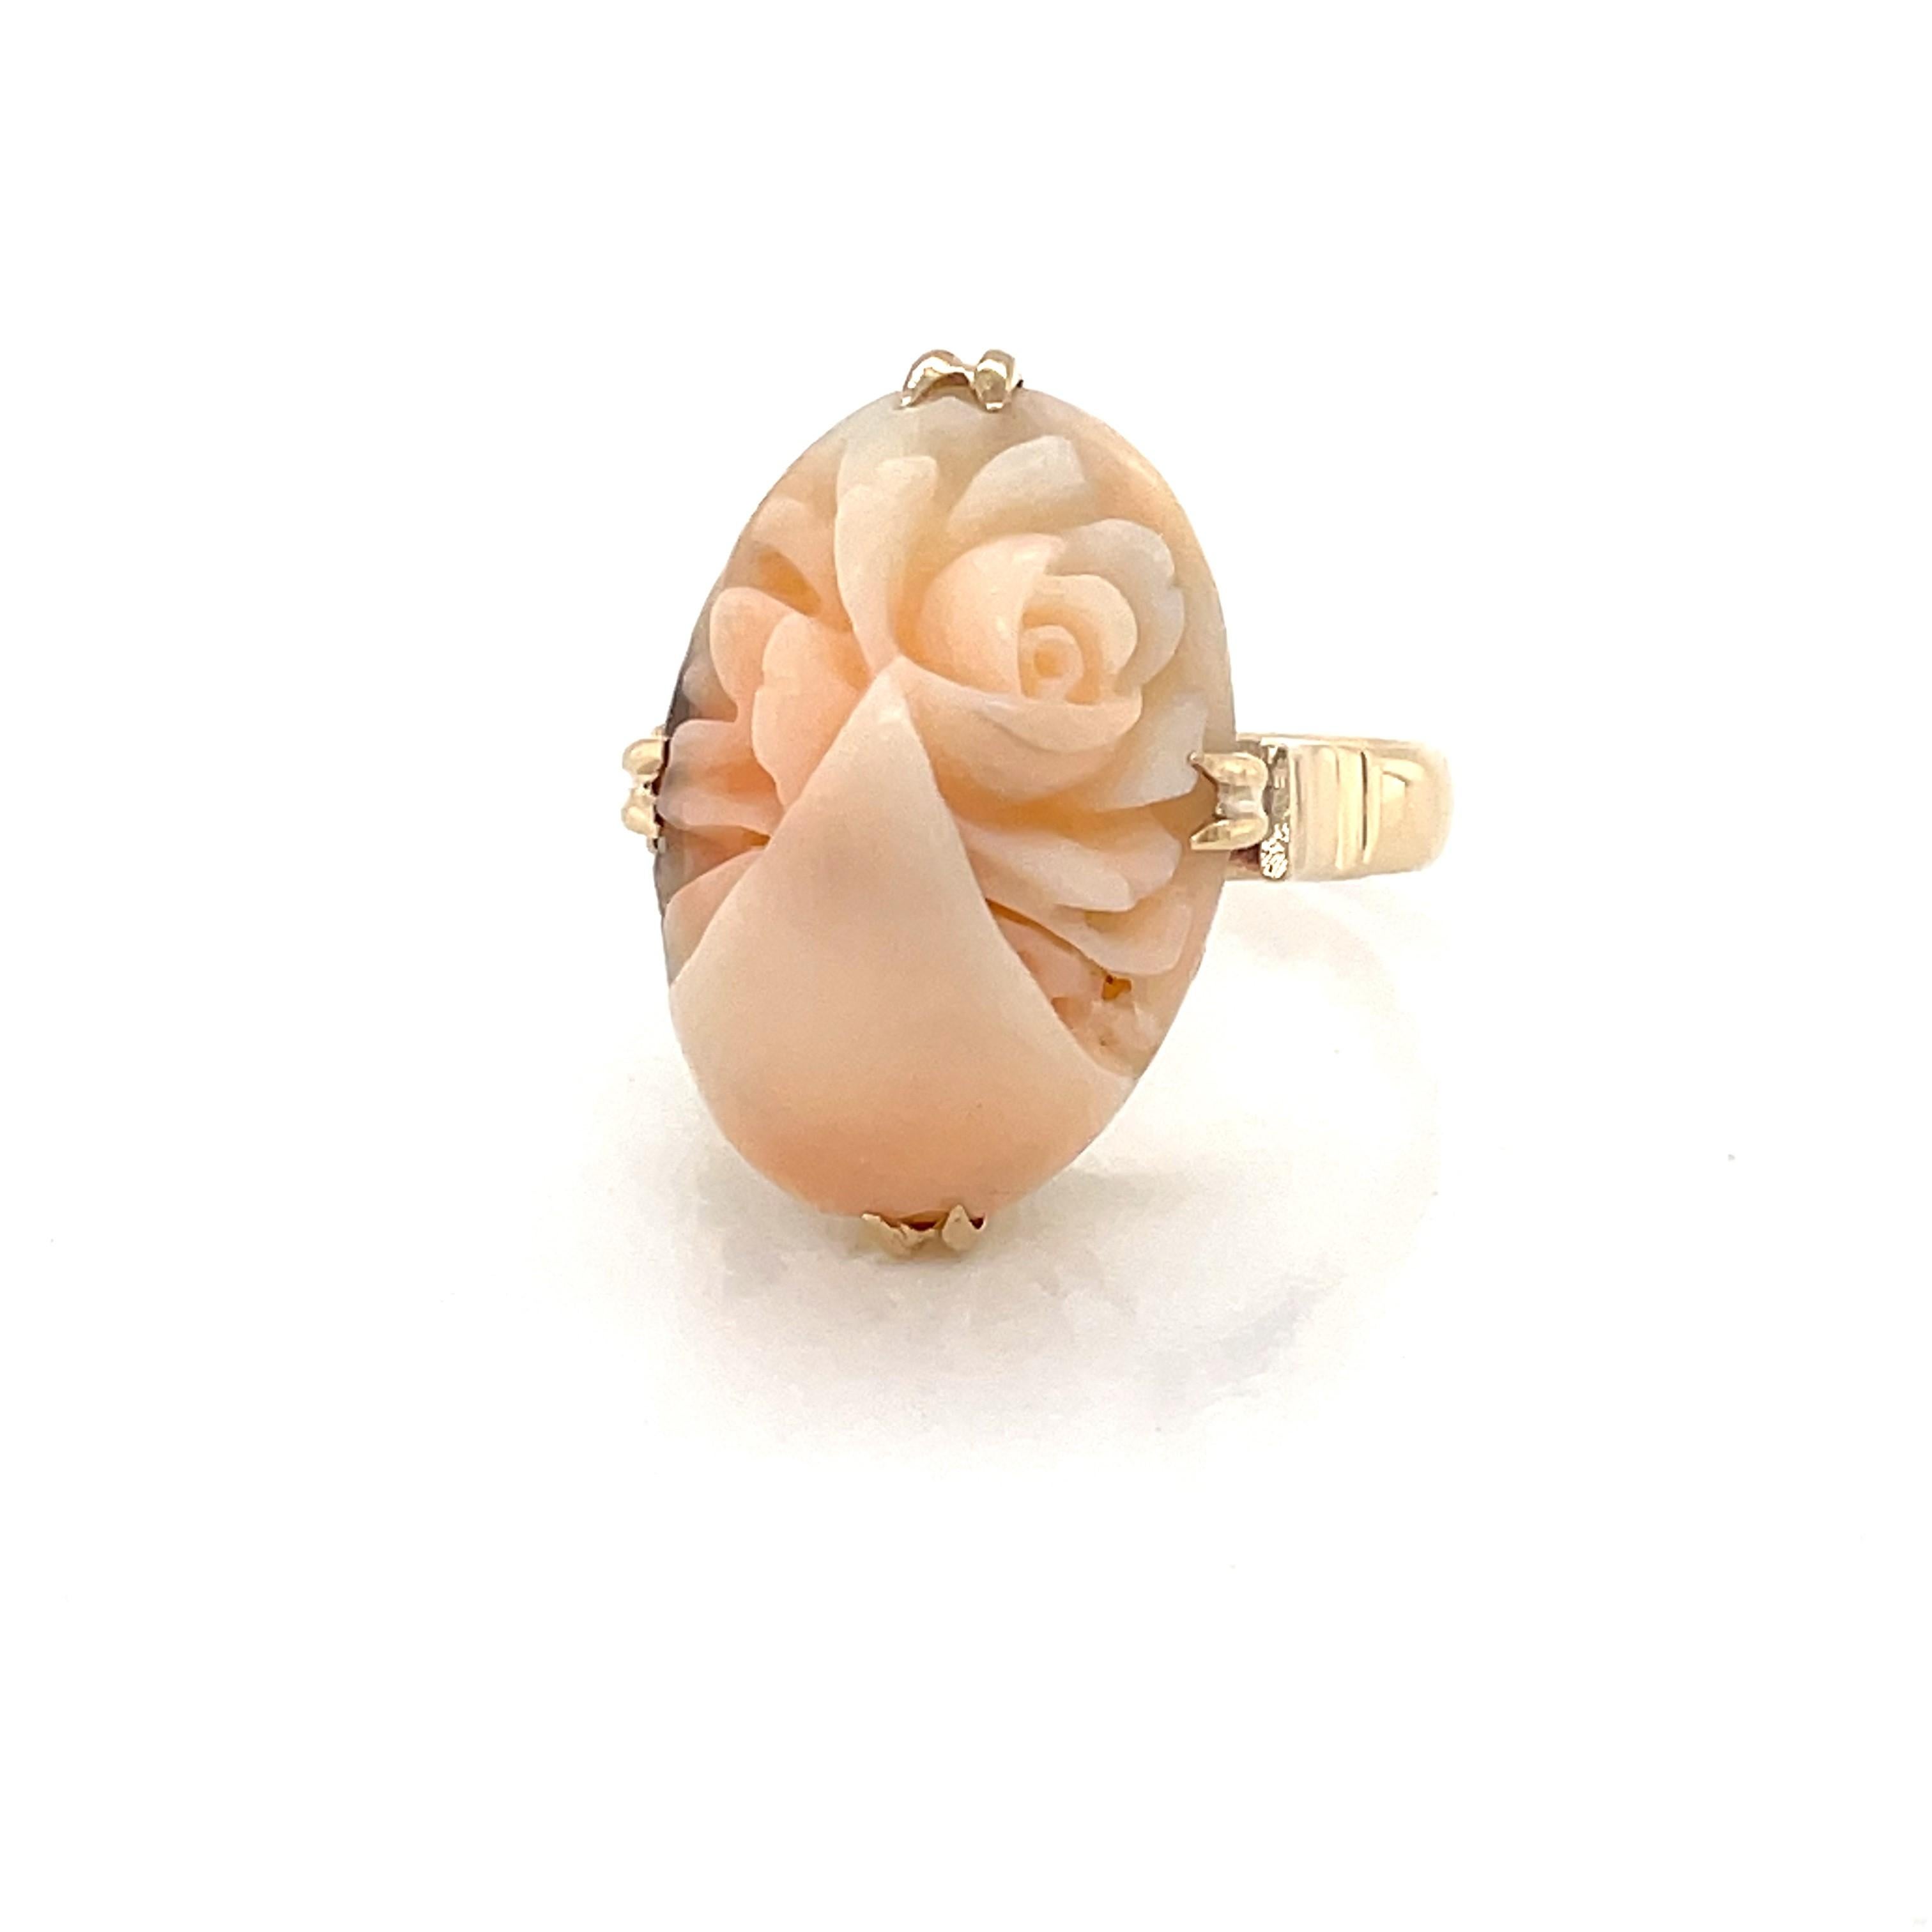 Romantic, floral inspired hand carved natural coral with light pink and white hues is featured a top the gallery of twelve karat 12K yellow gold in this antique style ring.
The beautiful oval cabochon measures approximately 12mm x 20mm  in this size